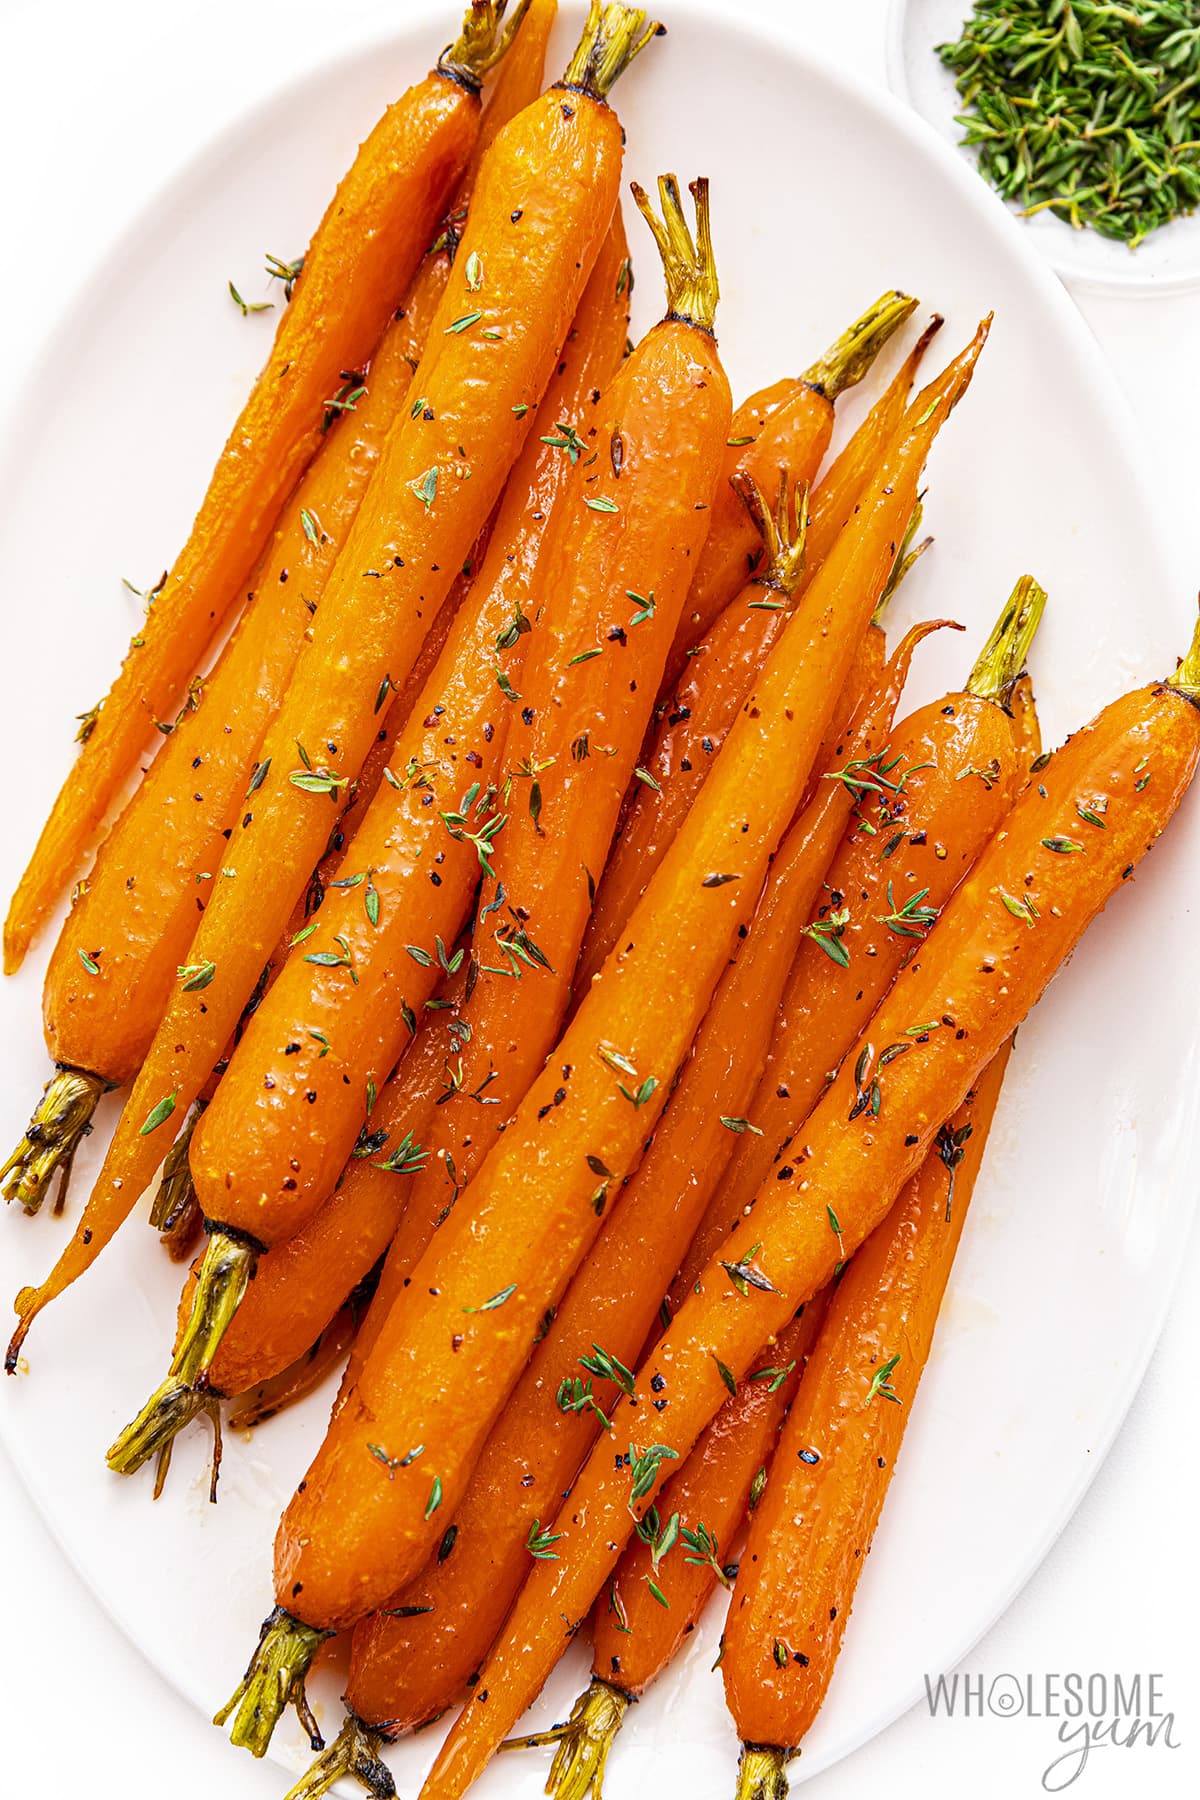 Oven roasted carrots on a plate.